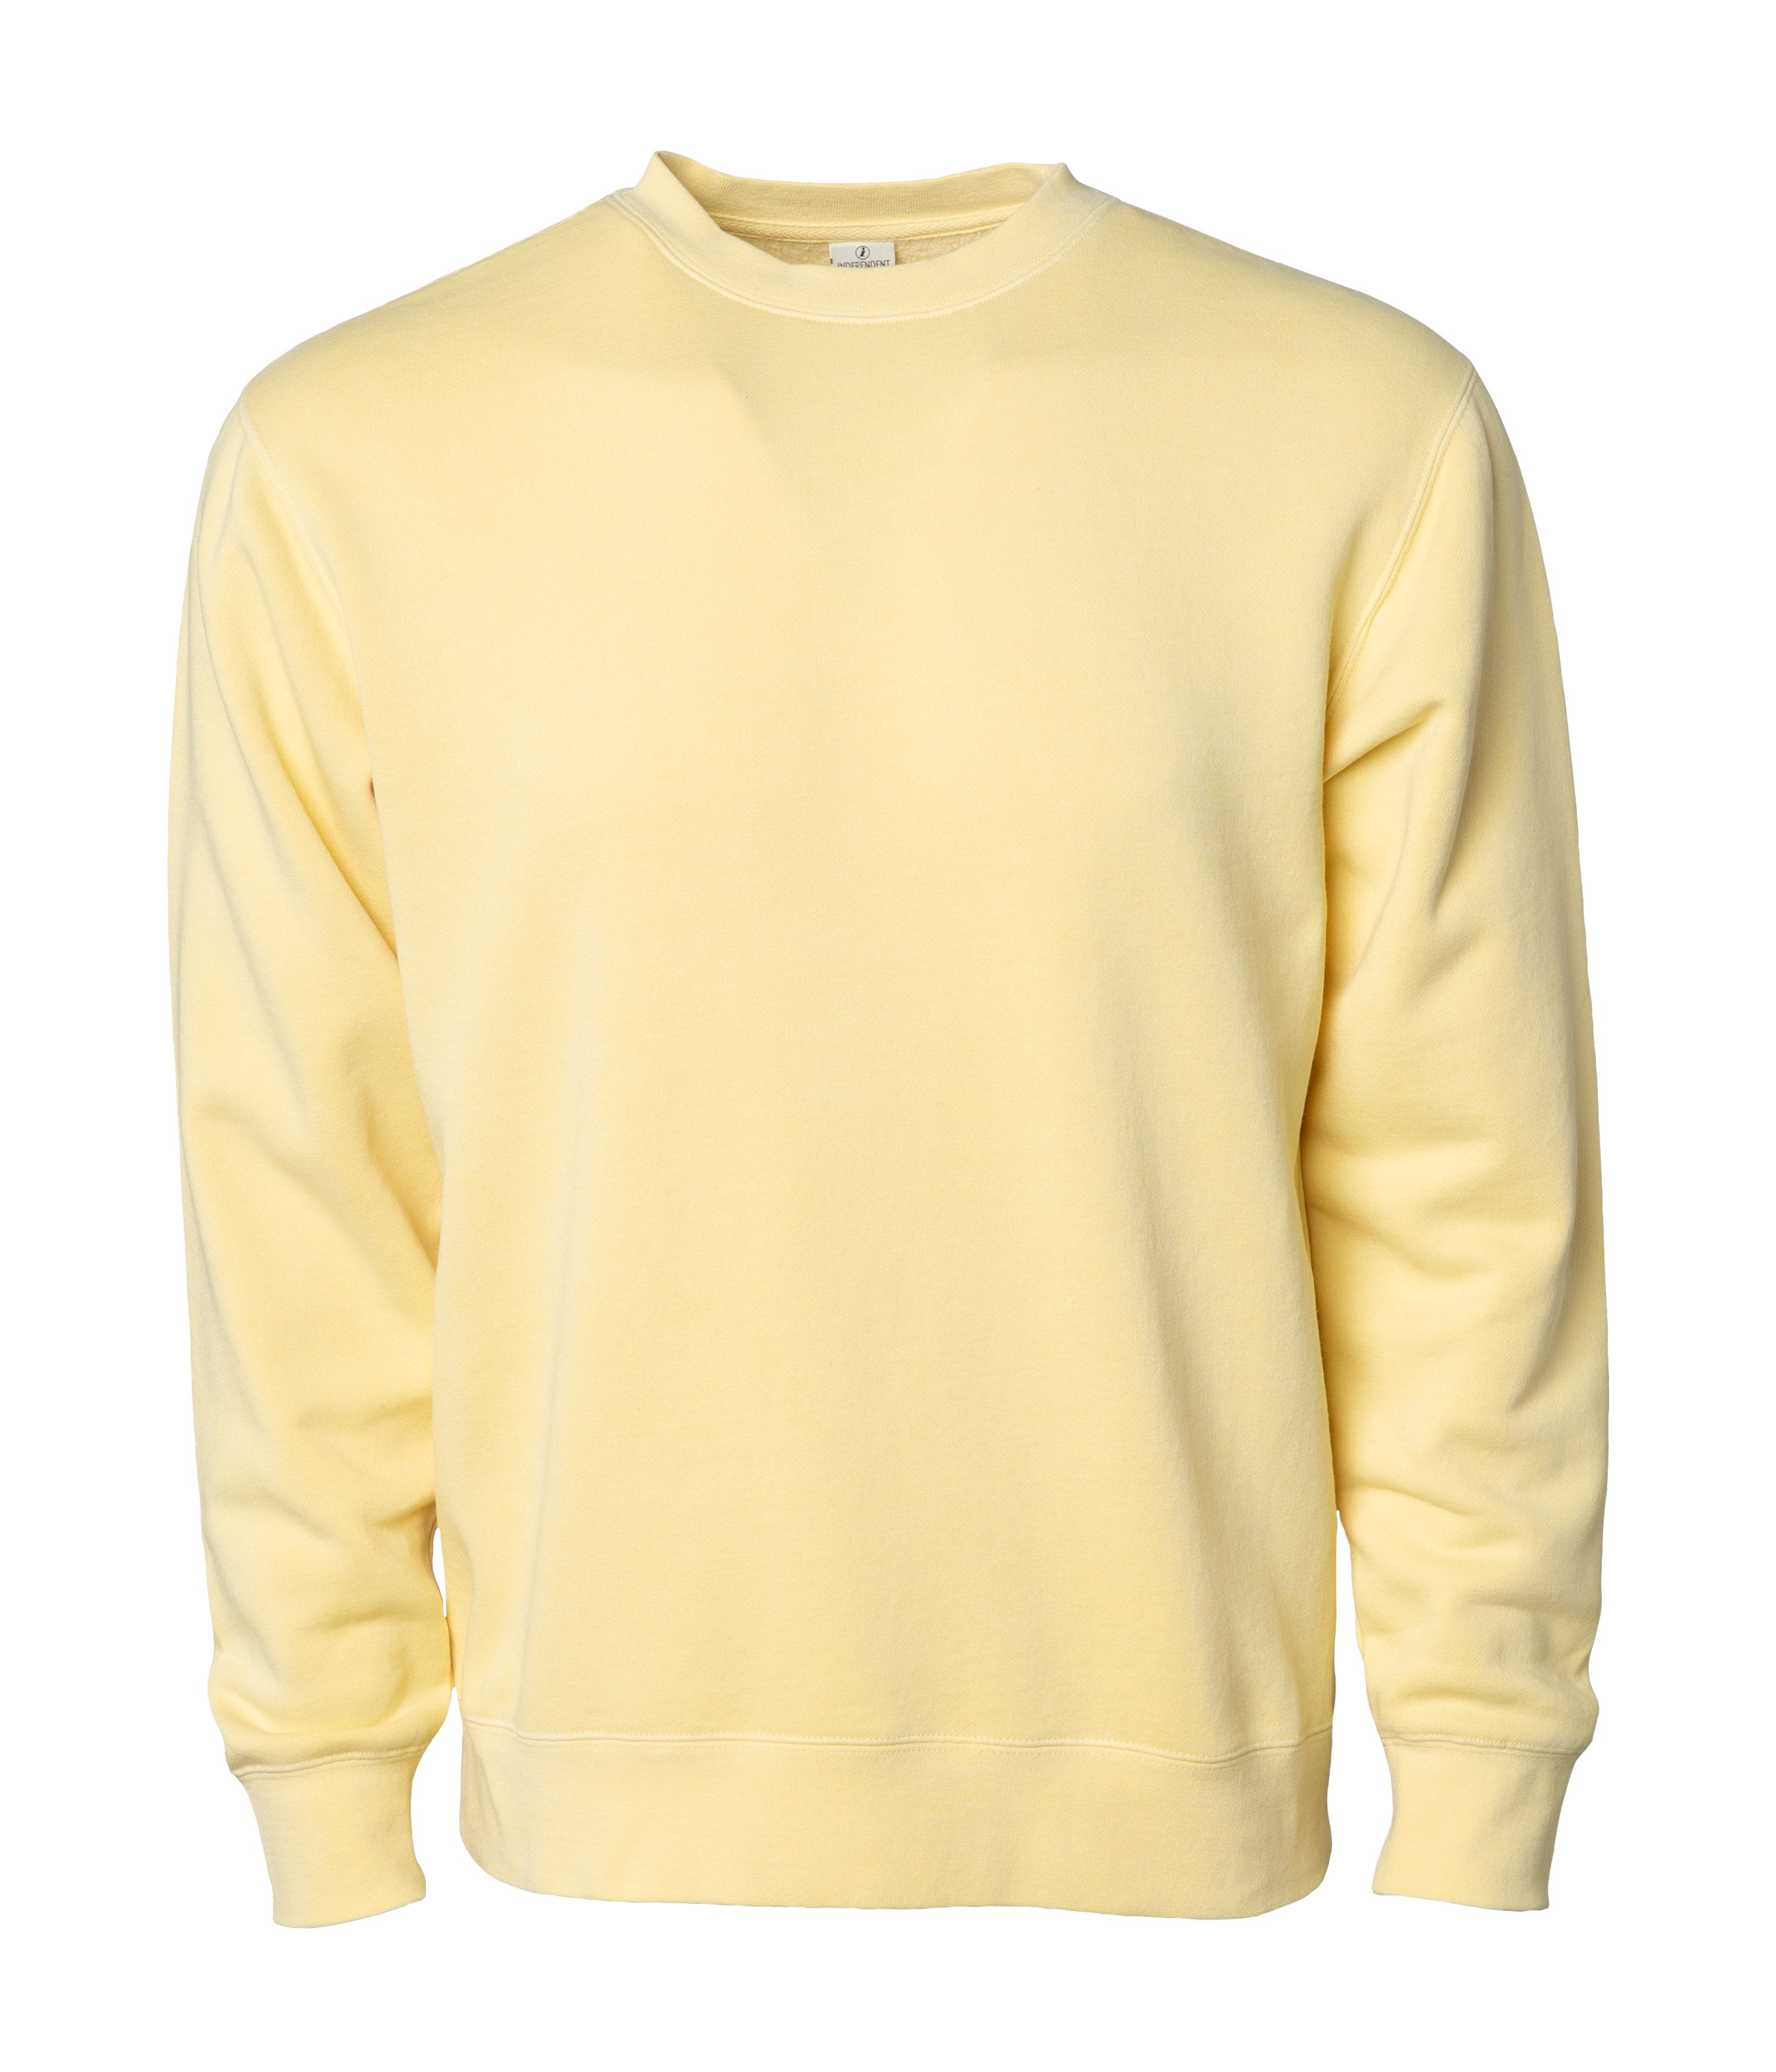 PRM3500 Unisex Midweight Pigment Dyed Crew Neck in Pigment Yellow